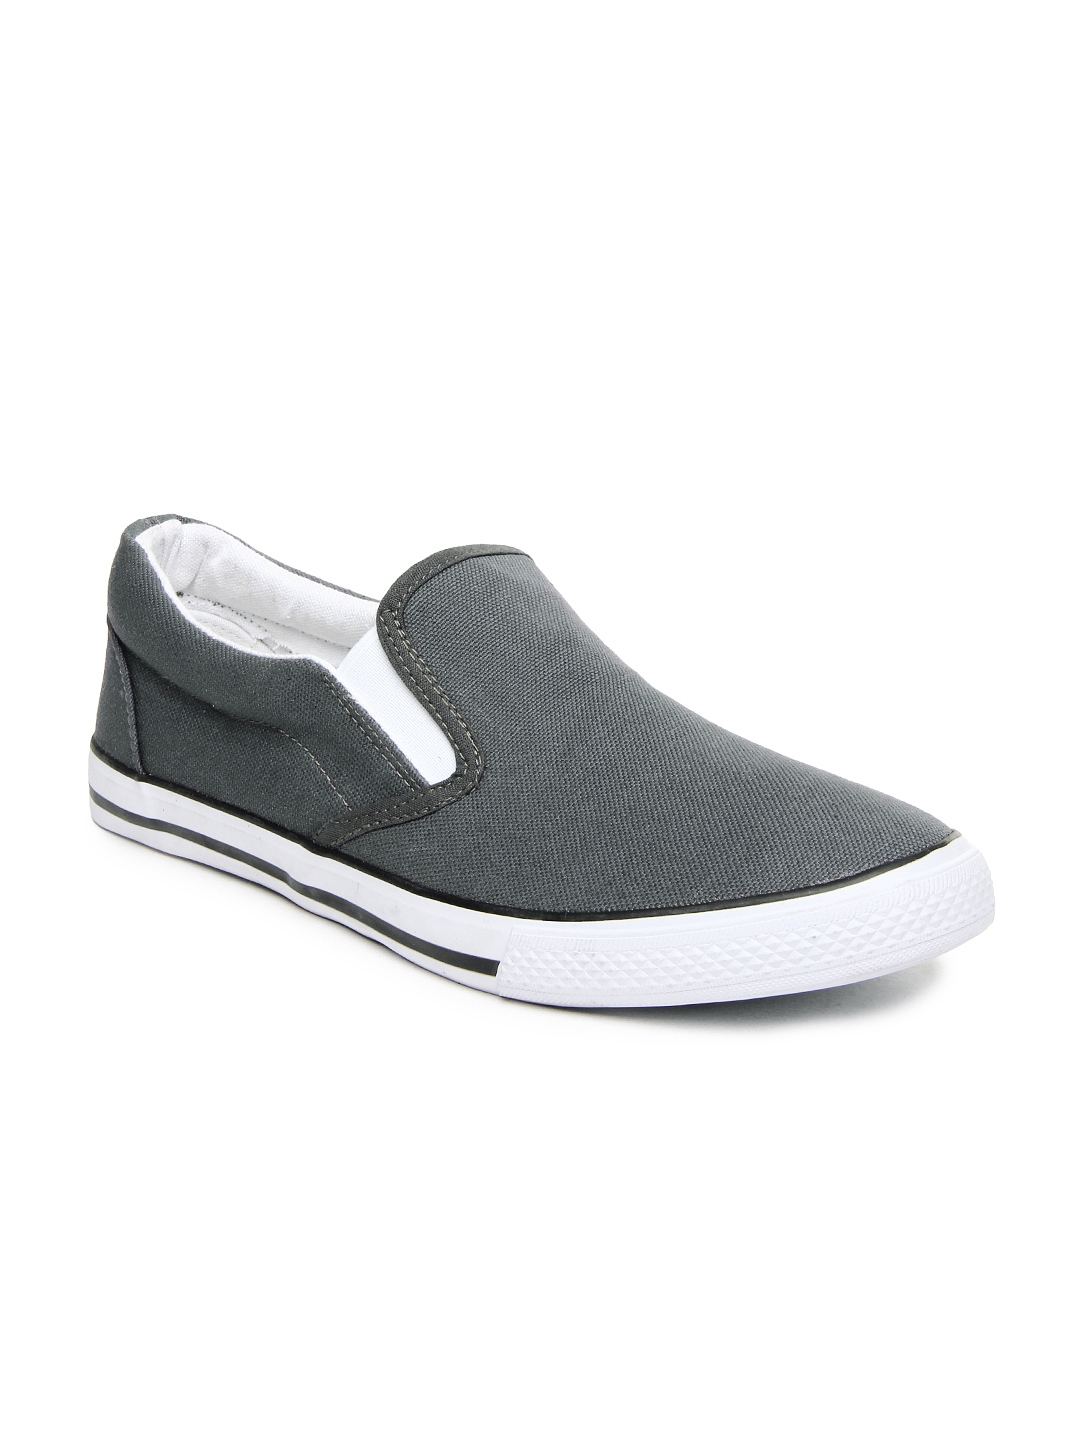 Buy Roadster Men Charcoal Grey Casual Shoes - Casual Shoes for Men ...